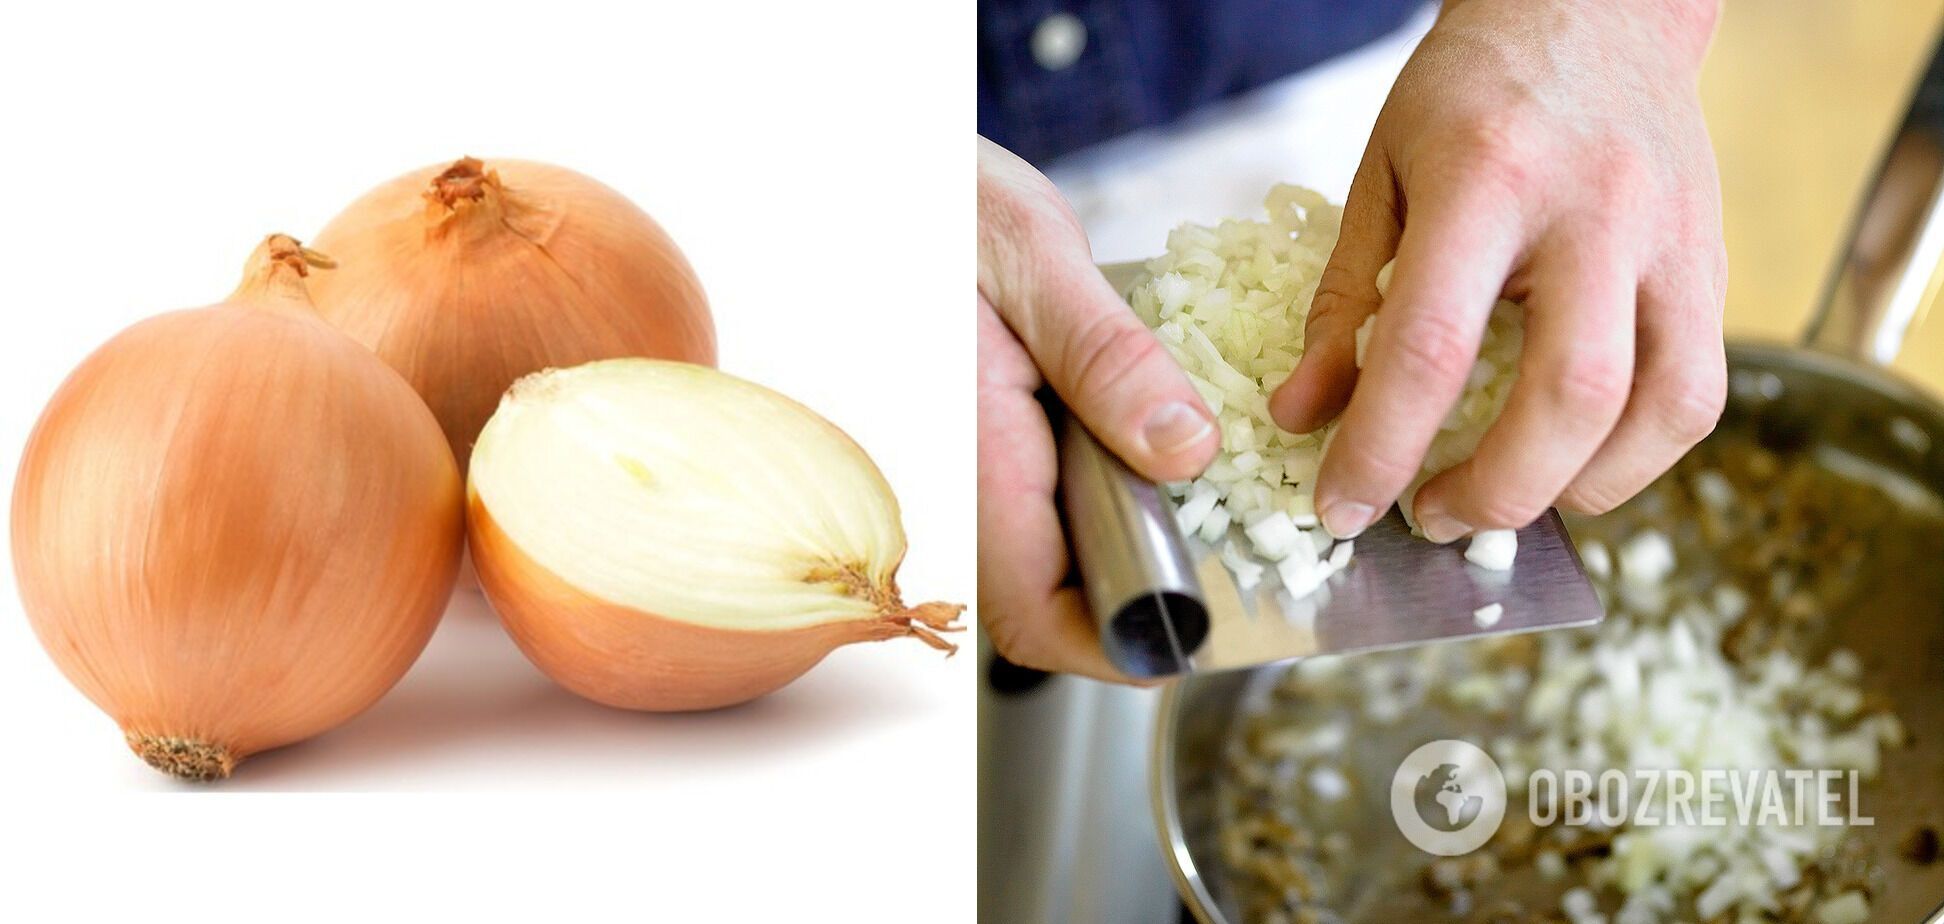 Onion for the dish